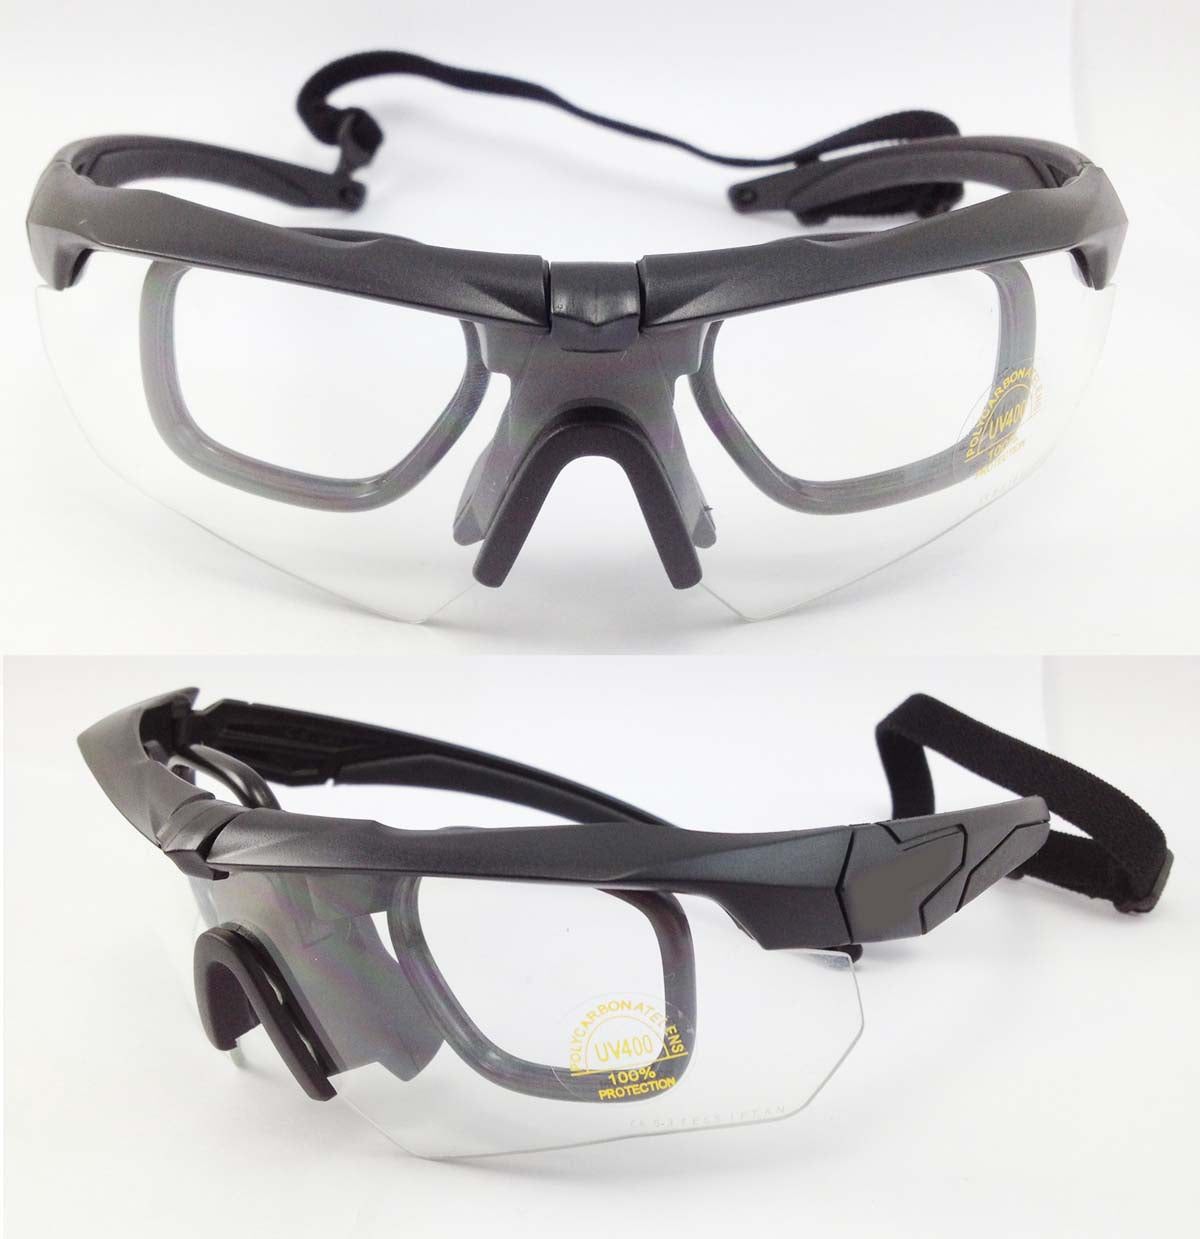 Ultra light thick temple cycling sunglasses with 3 interchangeable color lenses